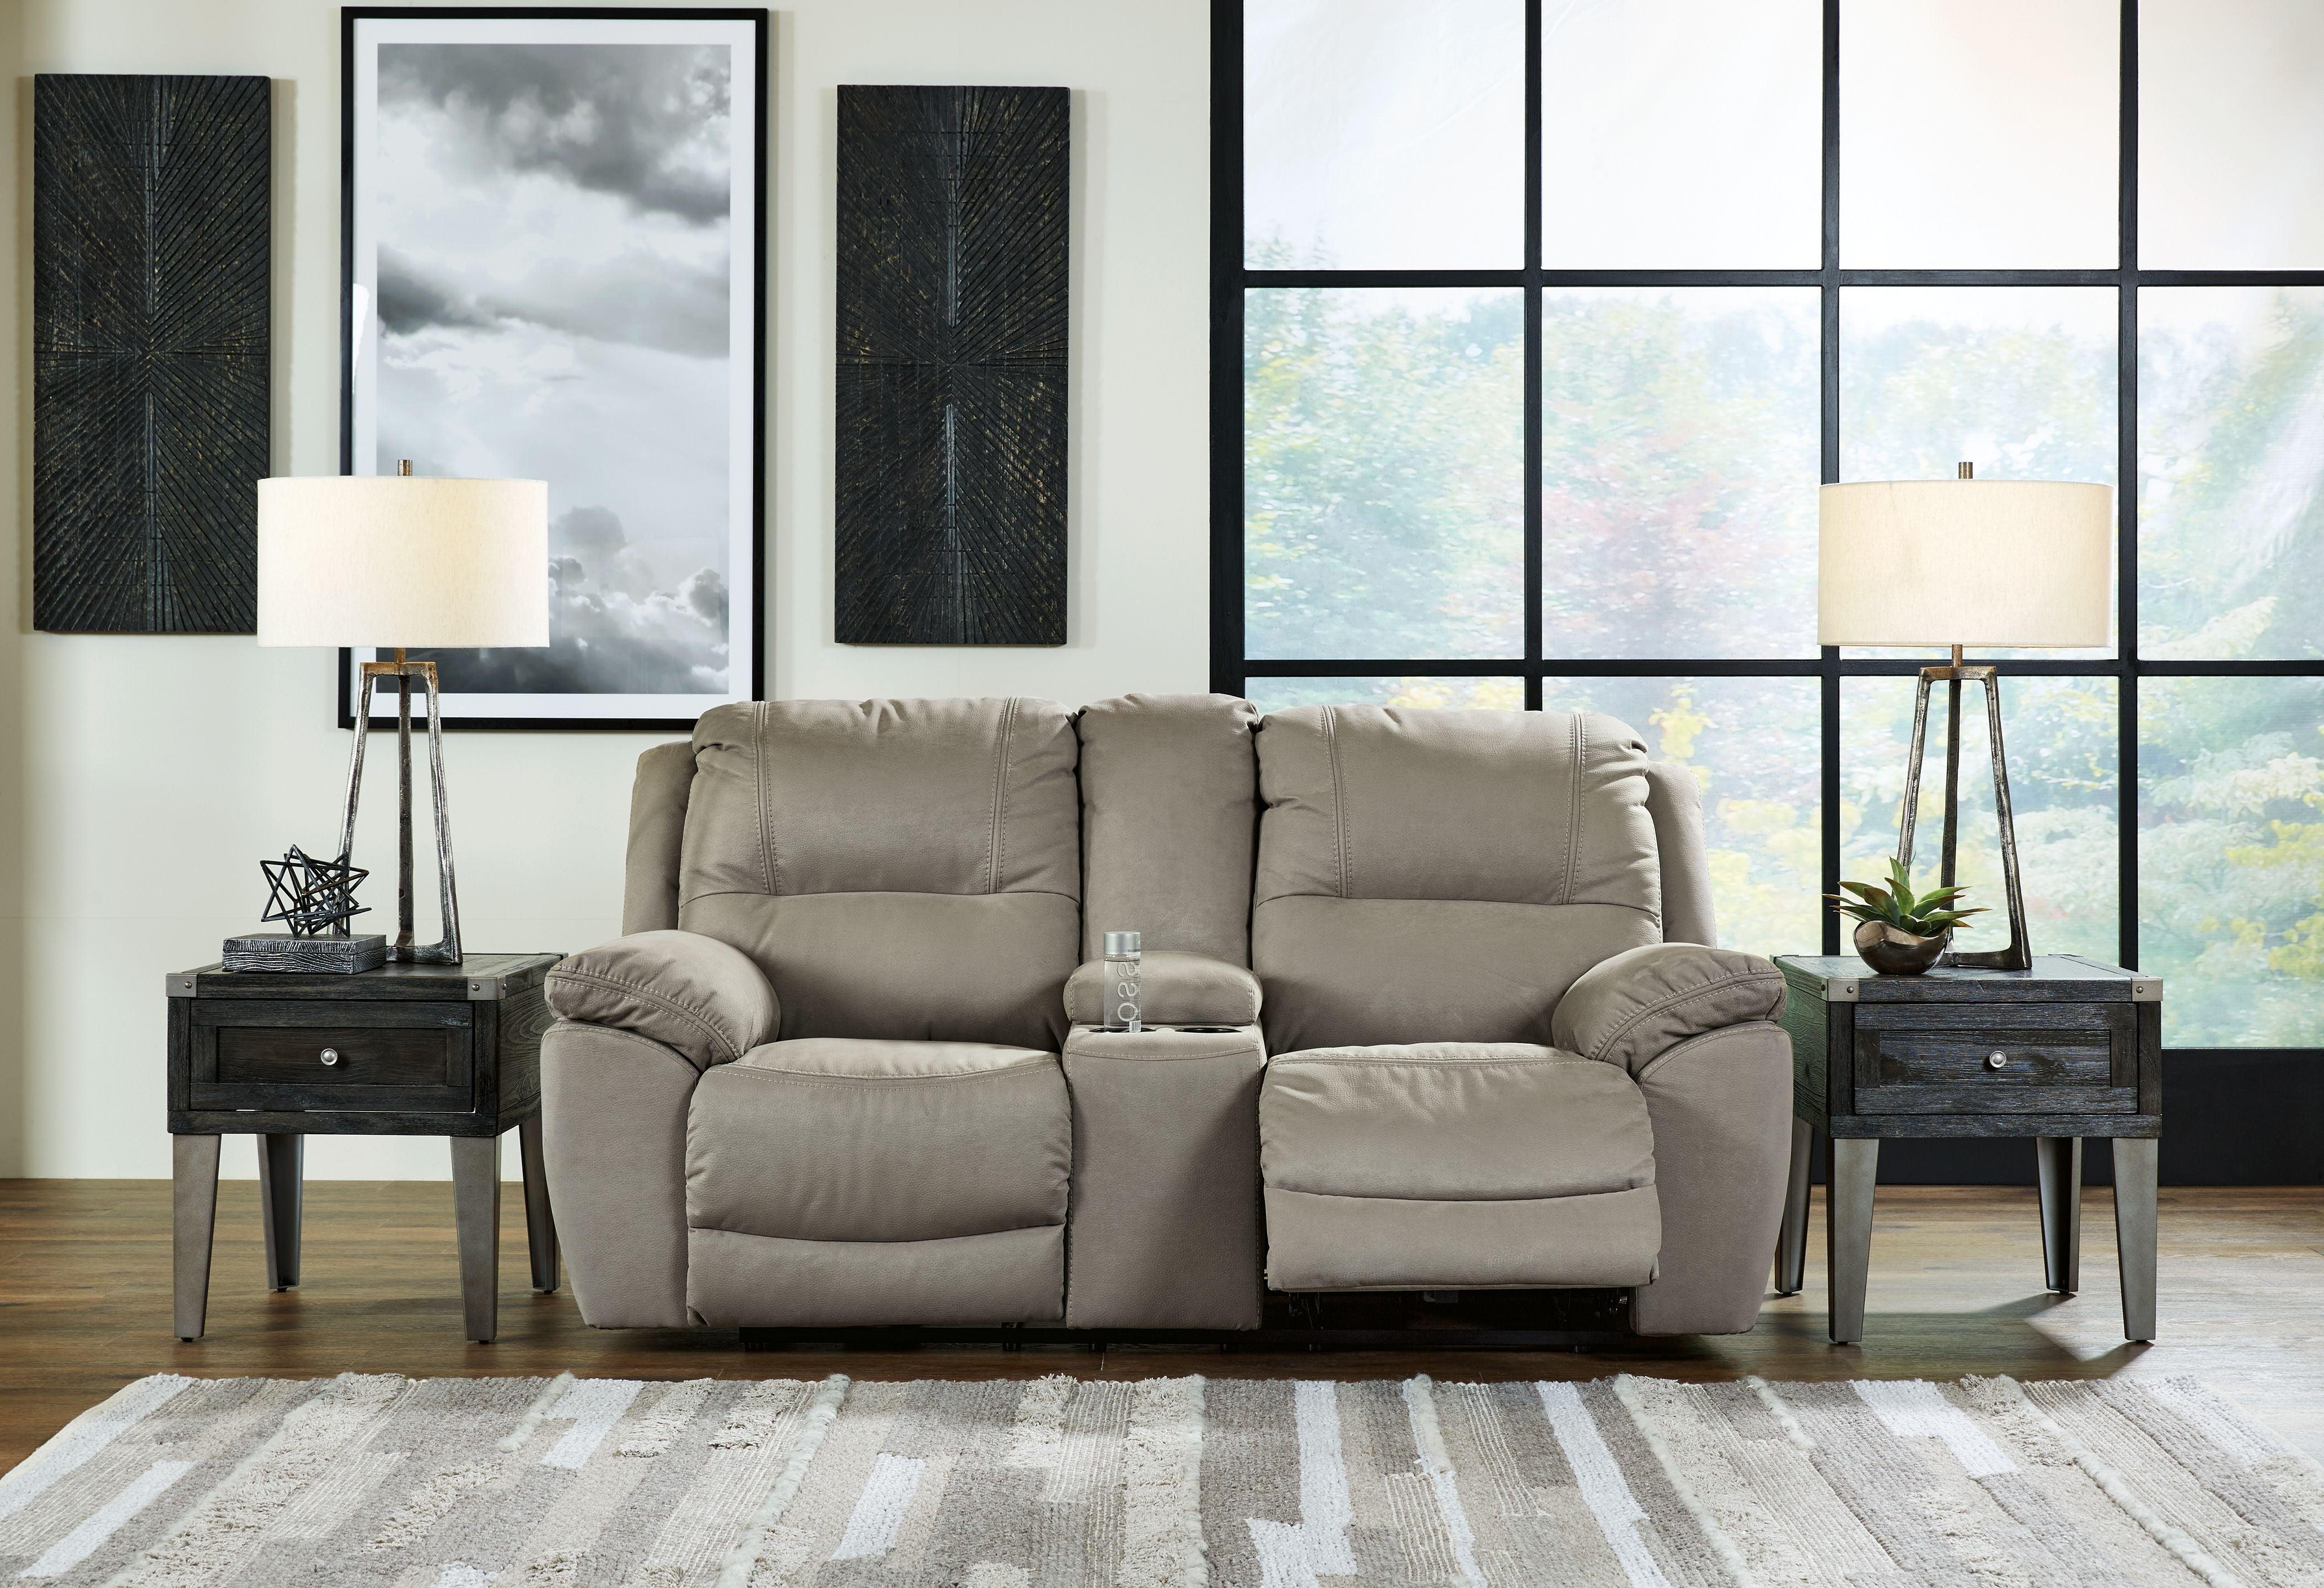 Signature Design by Ashley® - Next-Gen Gaucho - Double Reclining Loveseat - 5th Avenue Furniture